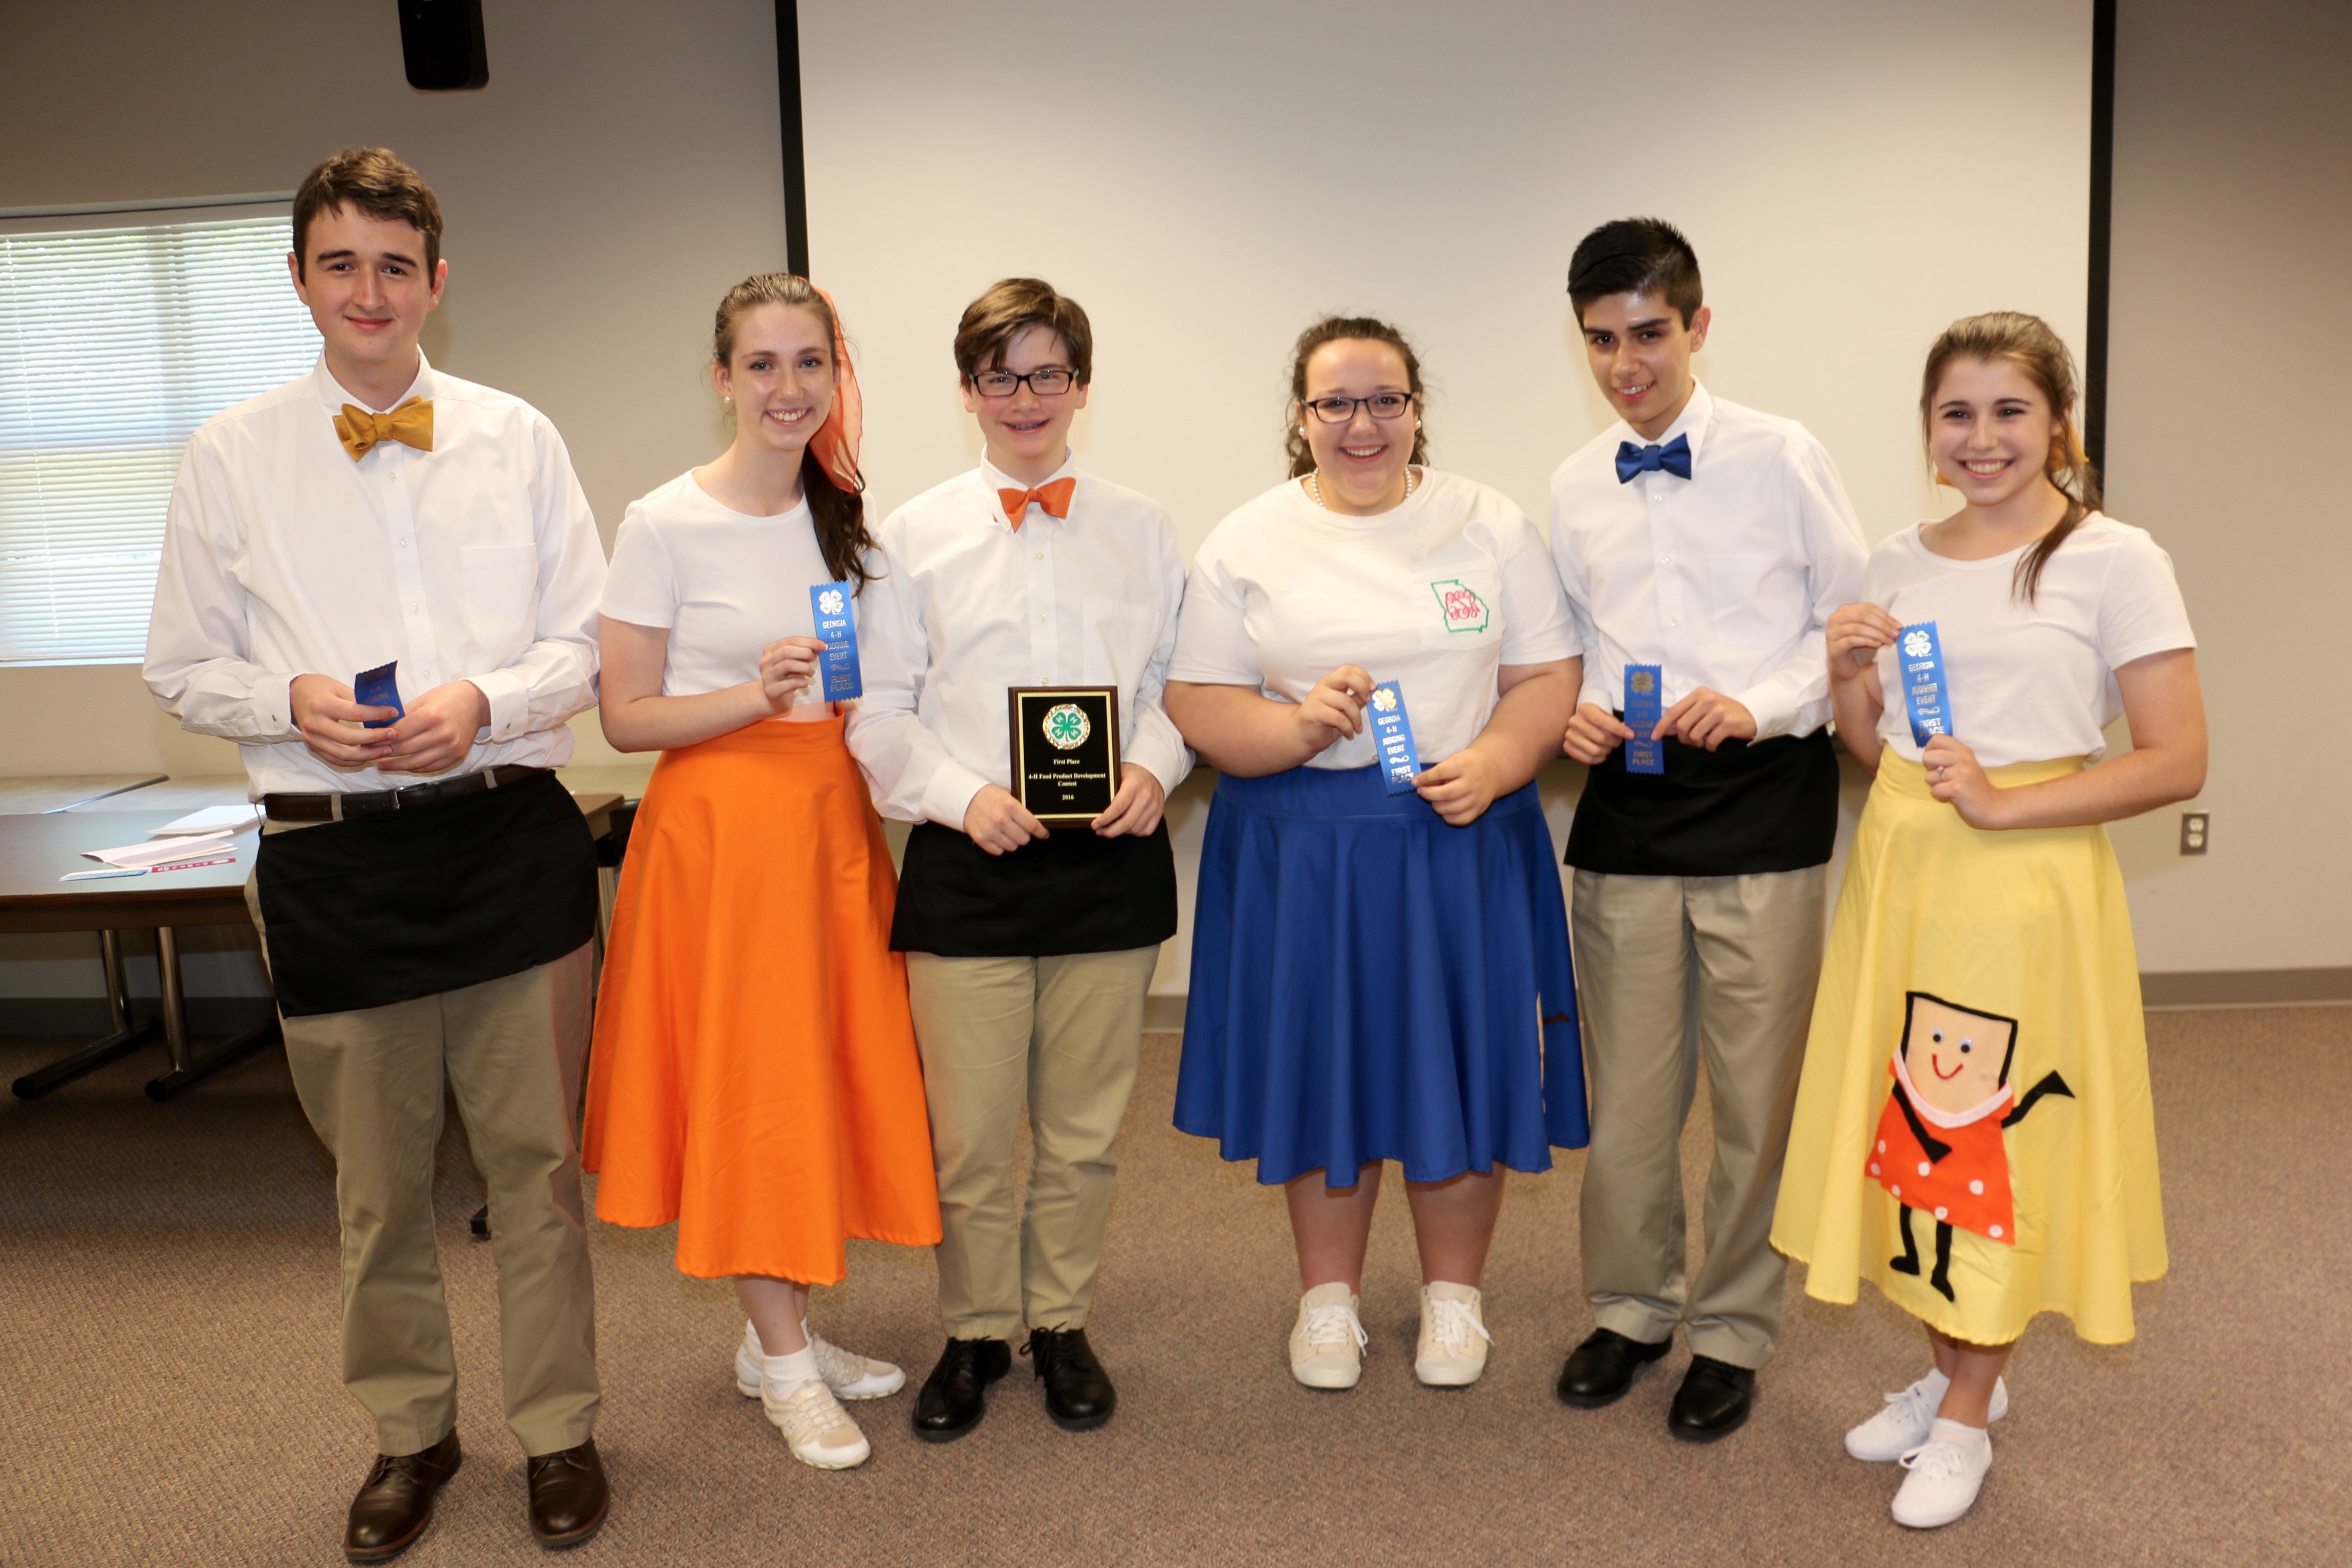 Members of the first place Spalding County 4-H Food Product Development Team include Hannah Rutledge, Isabel Rutledge, Carrianna Simmons, Nathaniel Haulk, Jordan Turner, Francisco Javier Zepeda and their coach, 4-H Program Assistant Lisa Kelley.